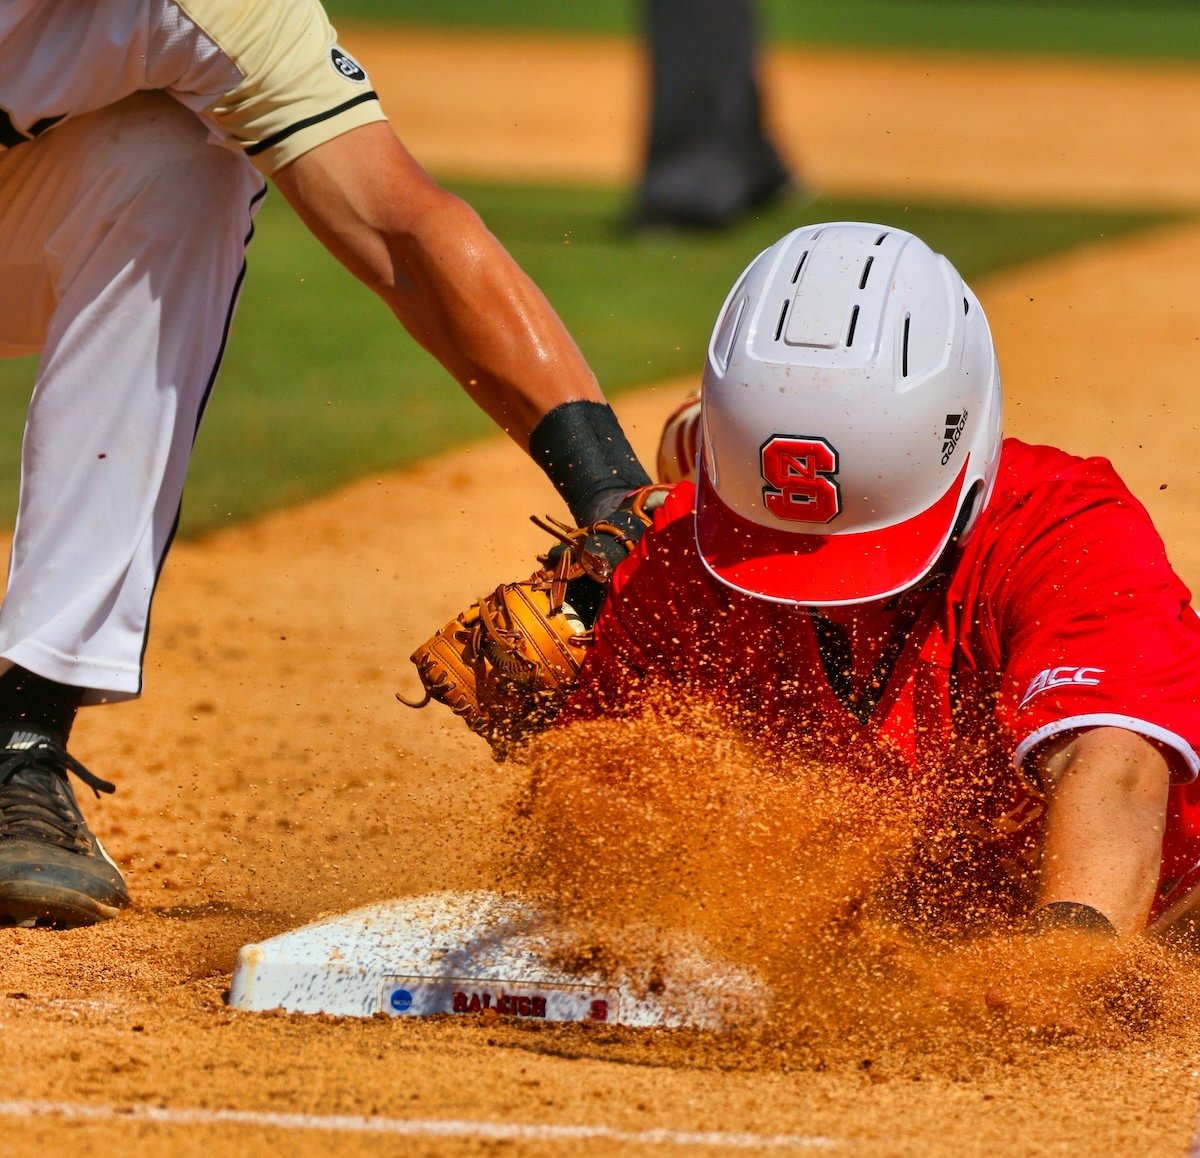 Close-up of a playing being tagged while sliding head first into a base as an example of baseball photography